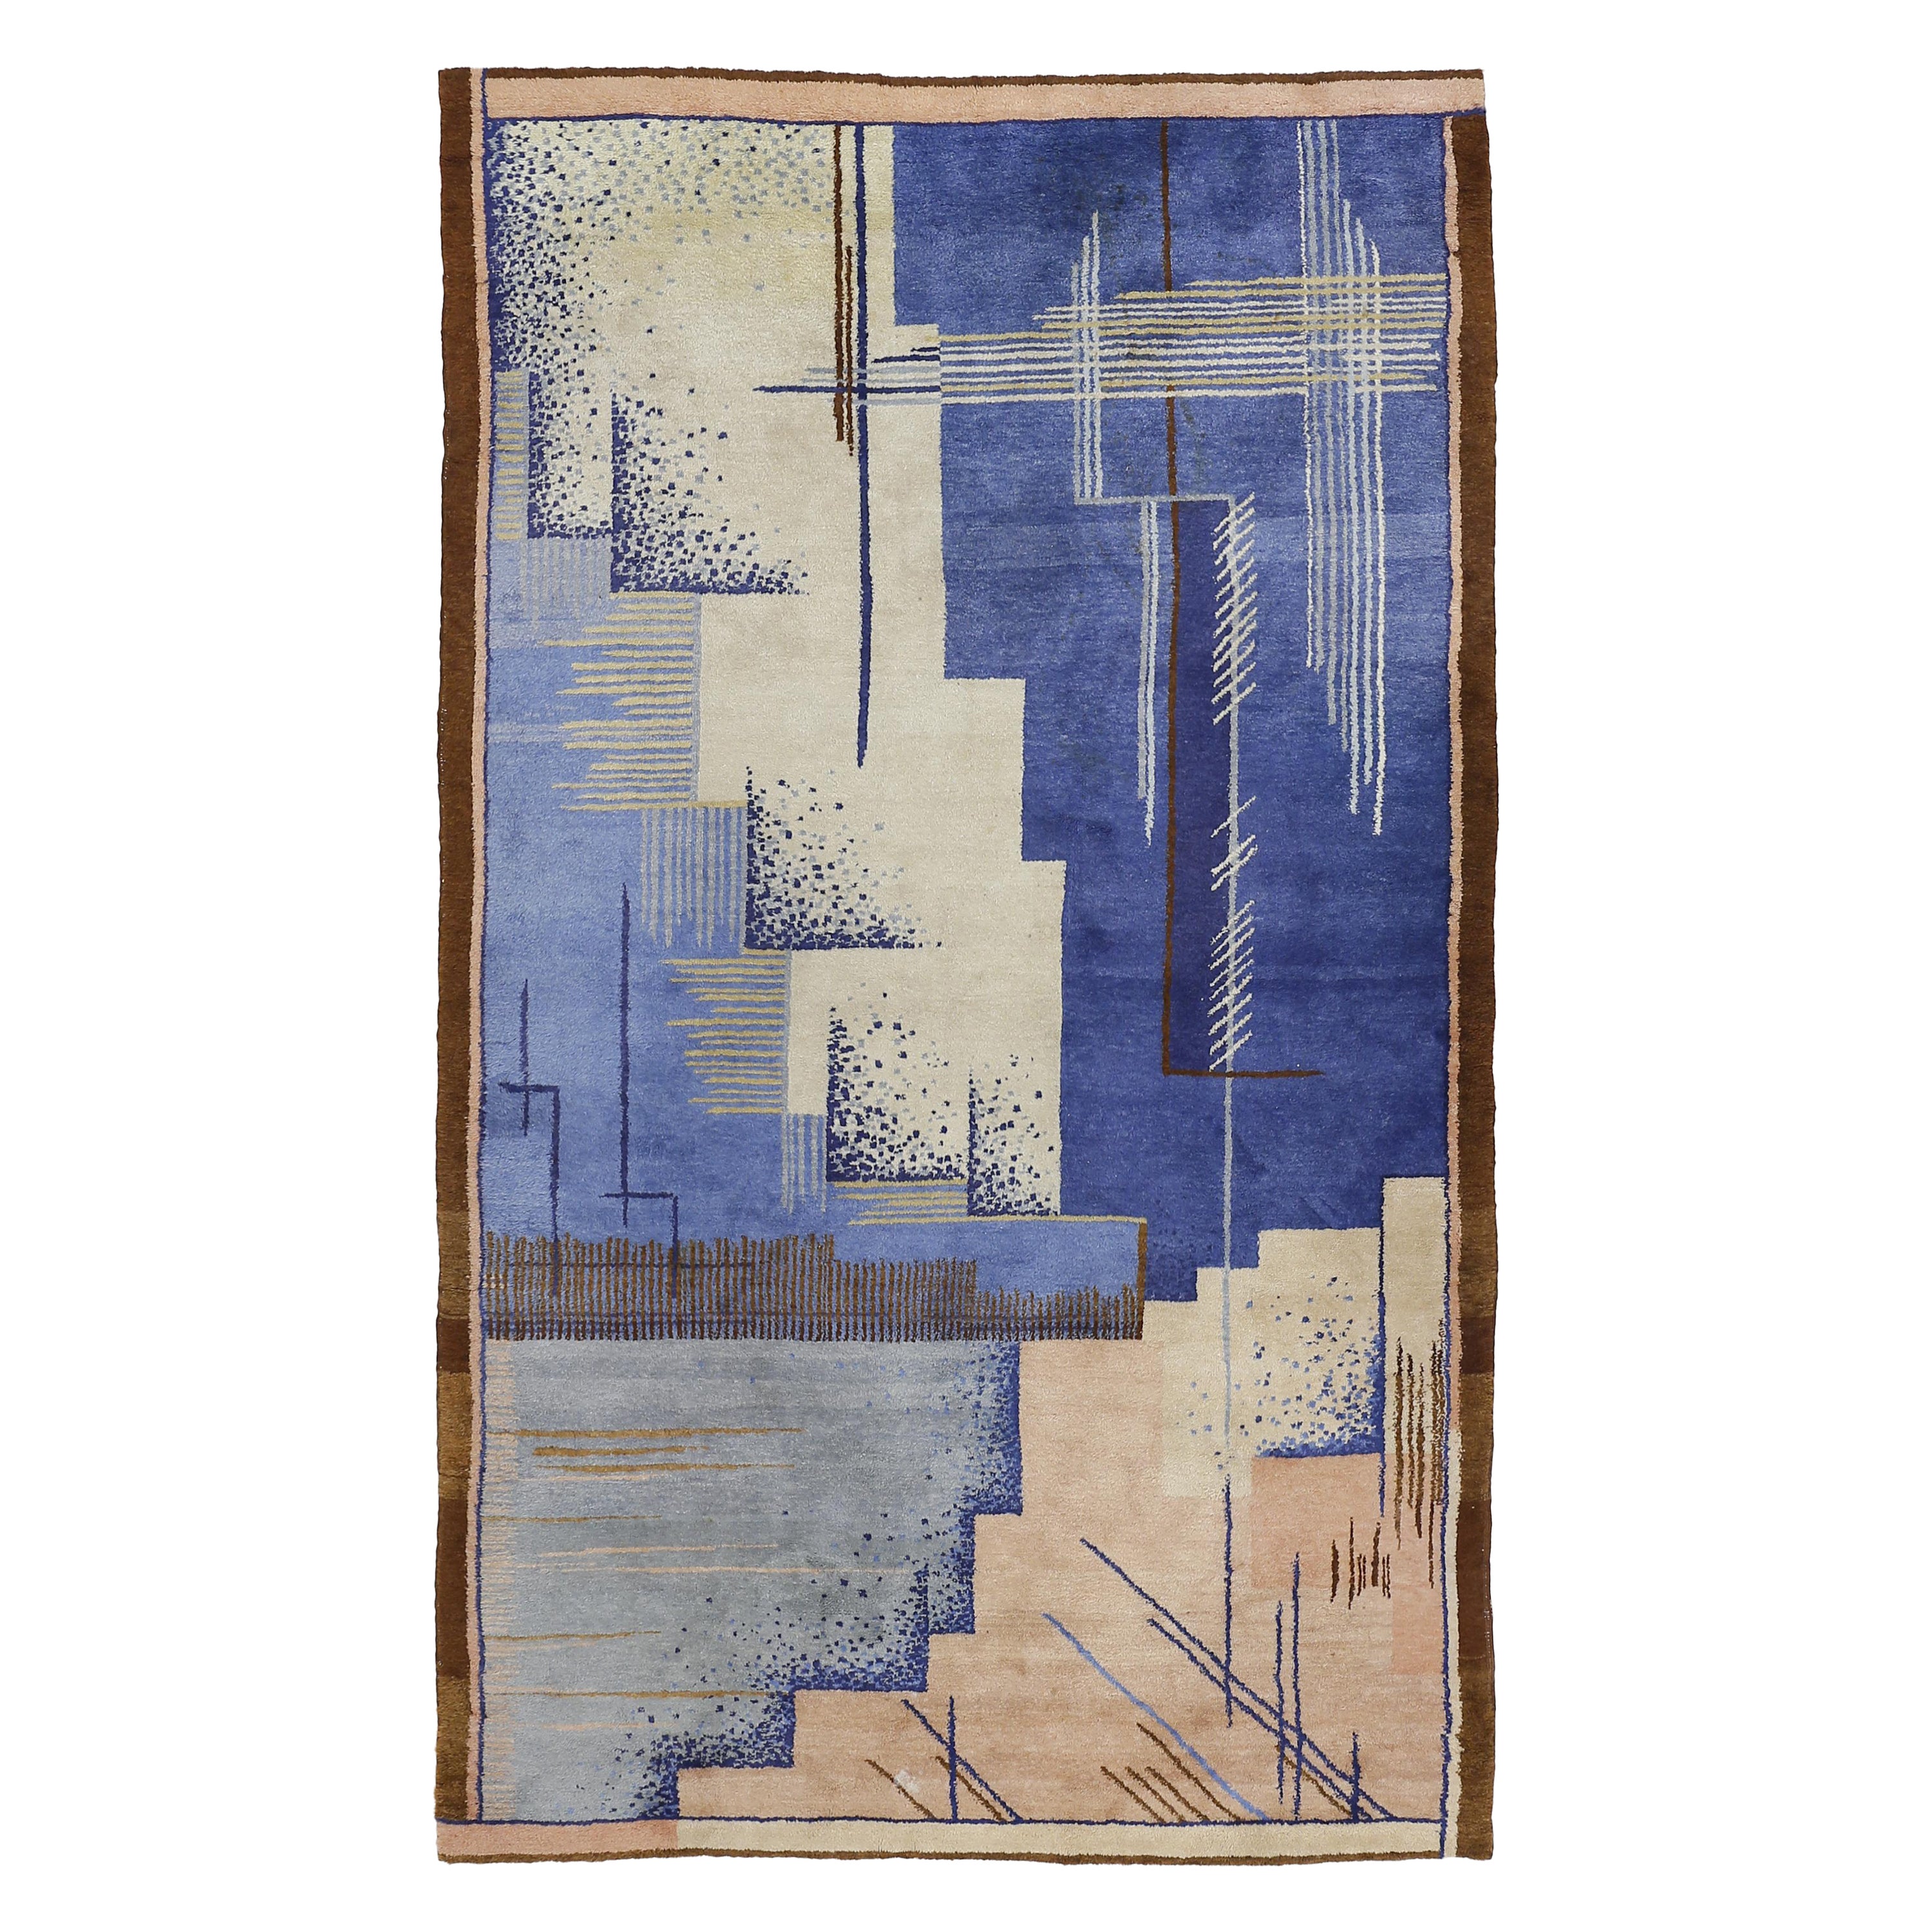 French Art Deco Rug Designed by Jean Burkhalter for Pierre Chareau Circa 1925